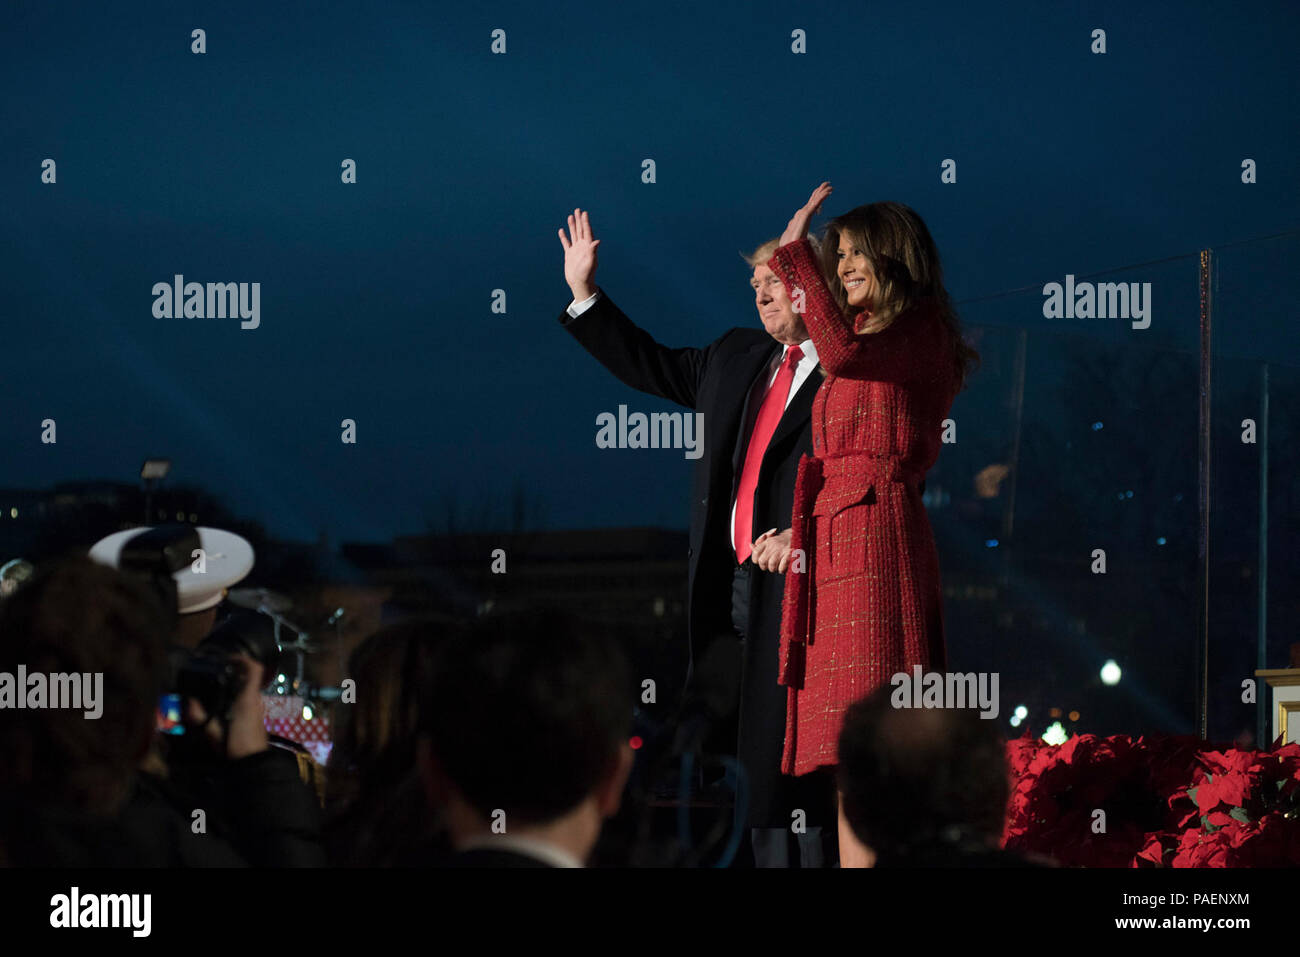 WASHINGTON (November 14, 2017) President Trump and first lady Melania Trump greets the crowd at the National Christmas Tree Lighting Ceremony in President's Park on The Ellipse in Washington, D.C. Since 1923 President's Park has hosted the annual National Christmas Tree Lighting. Stock Photo